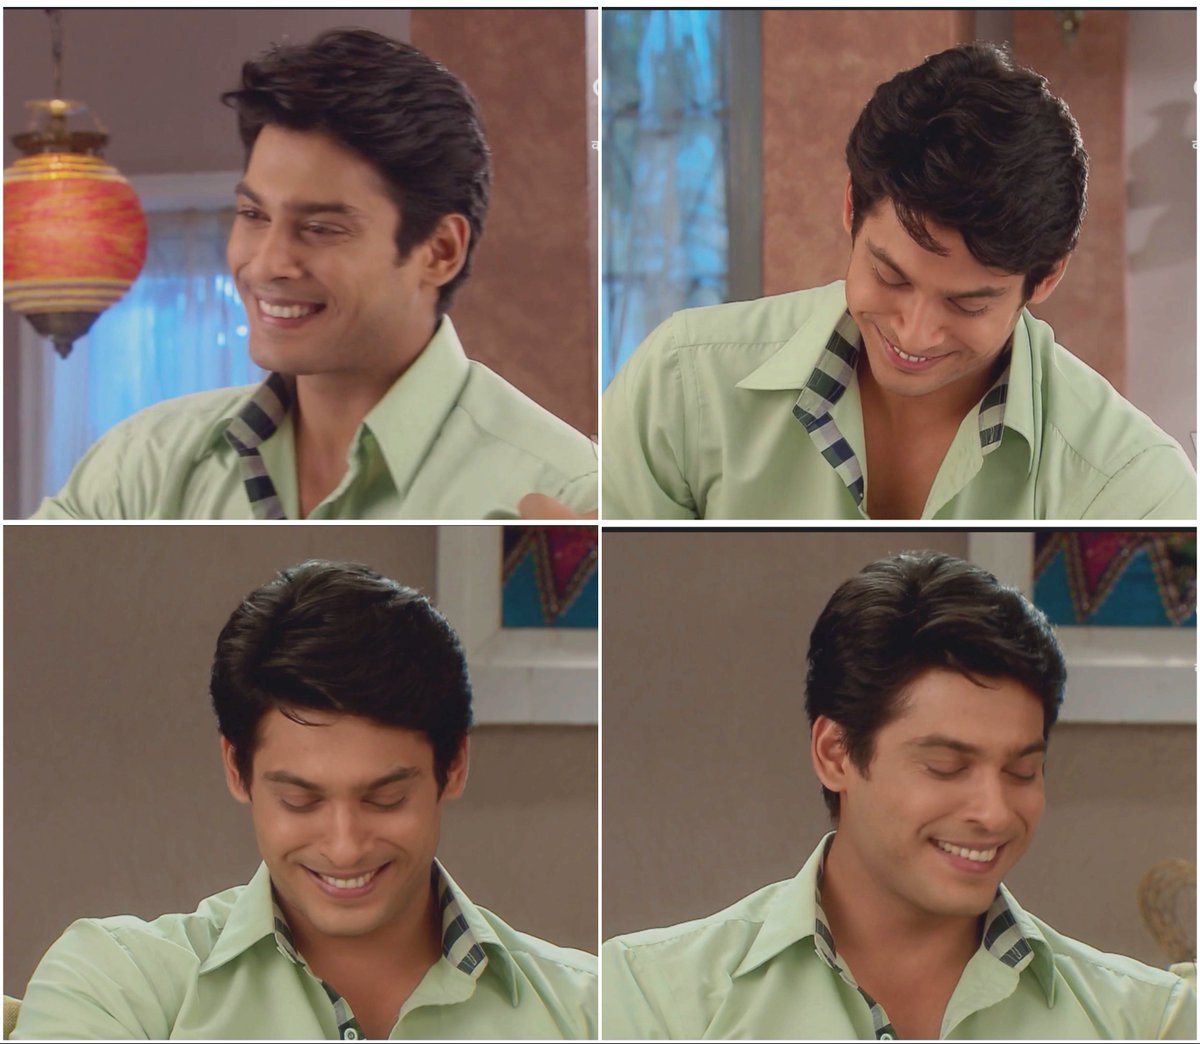 Overflowing with cuteness and smiles. 🥰 #SidharthShukla || #SidHearts